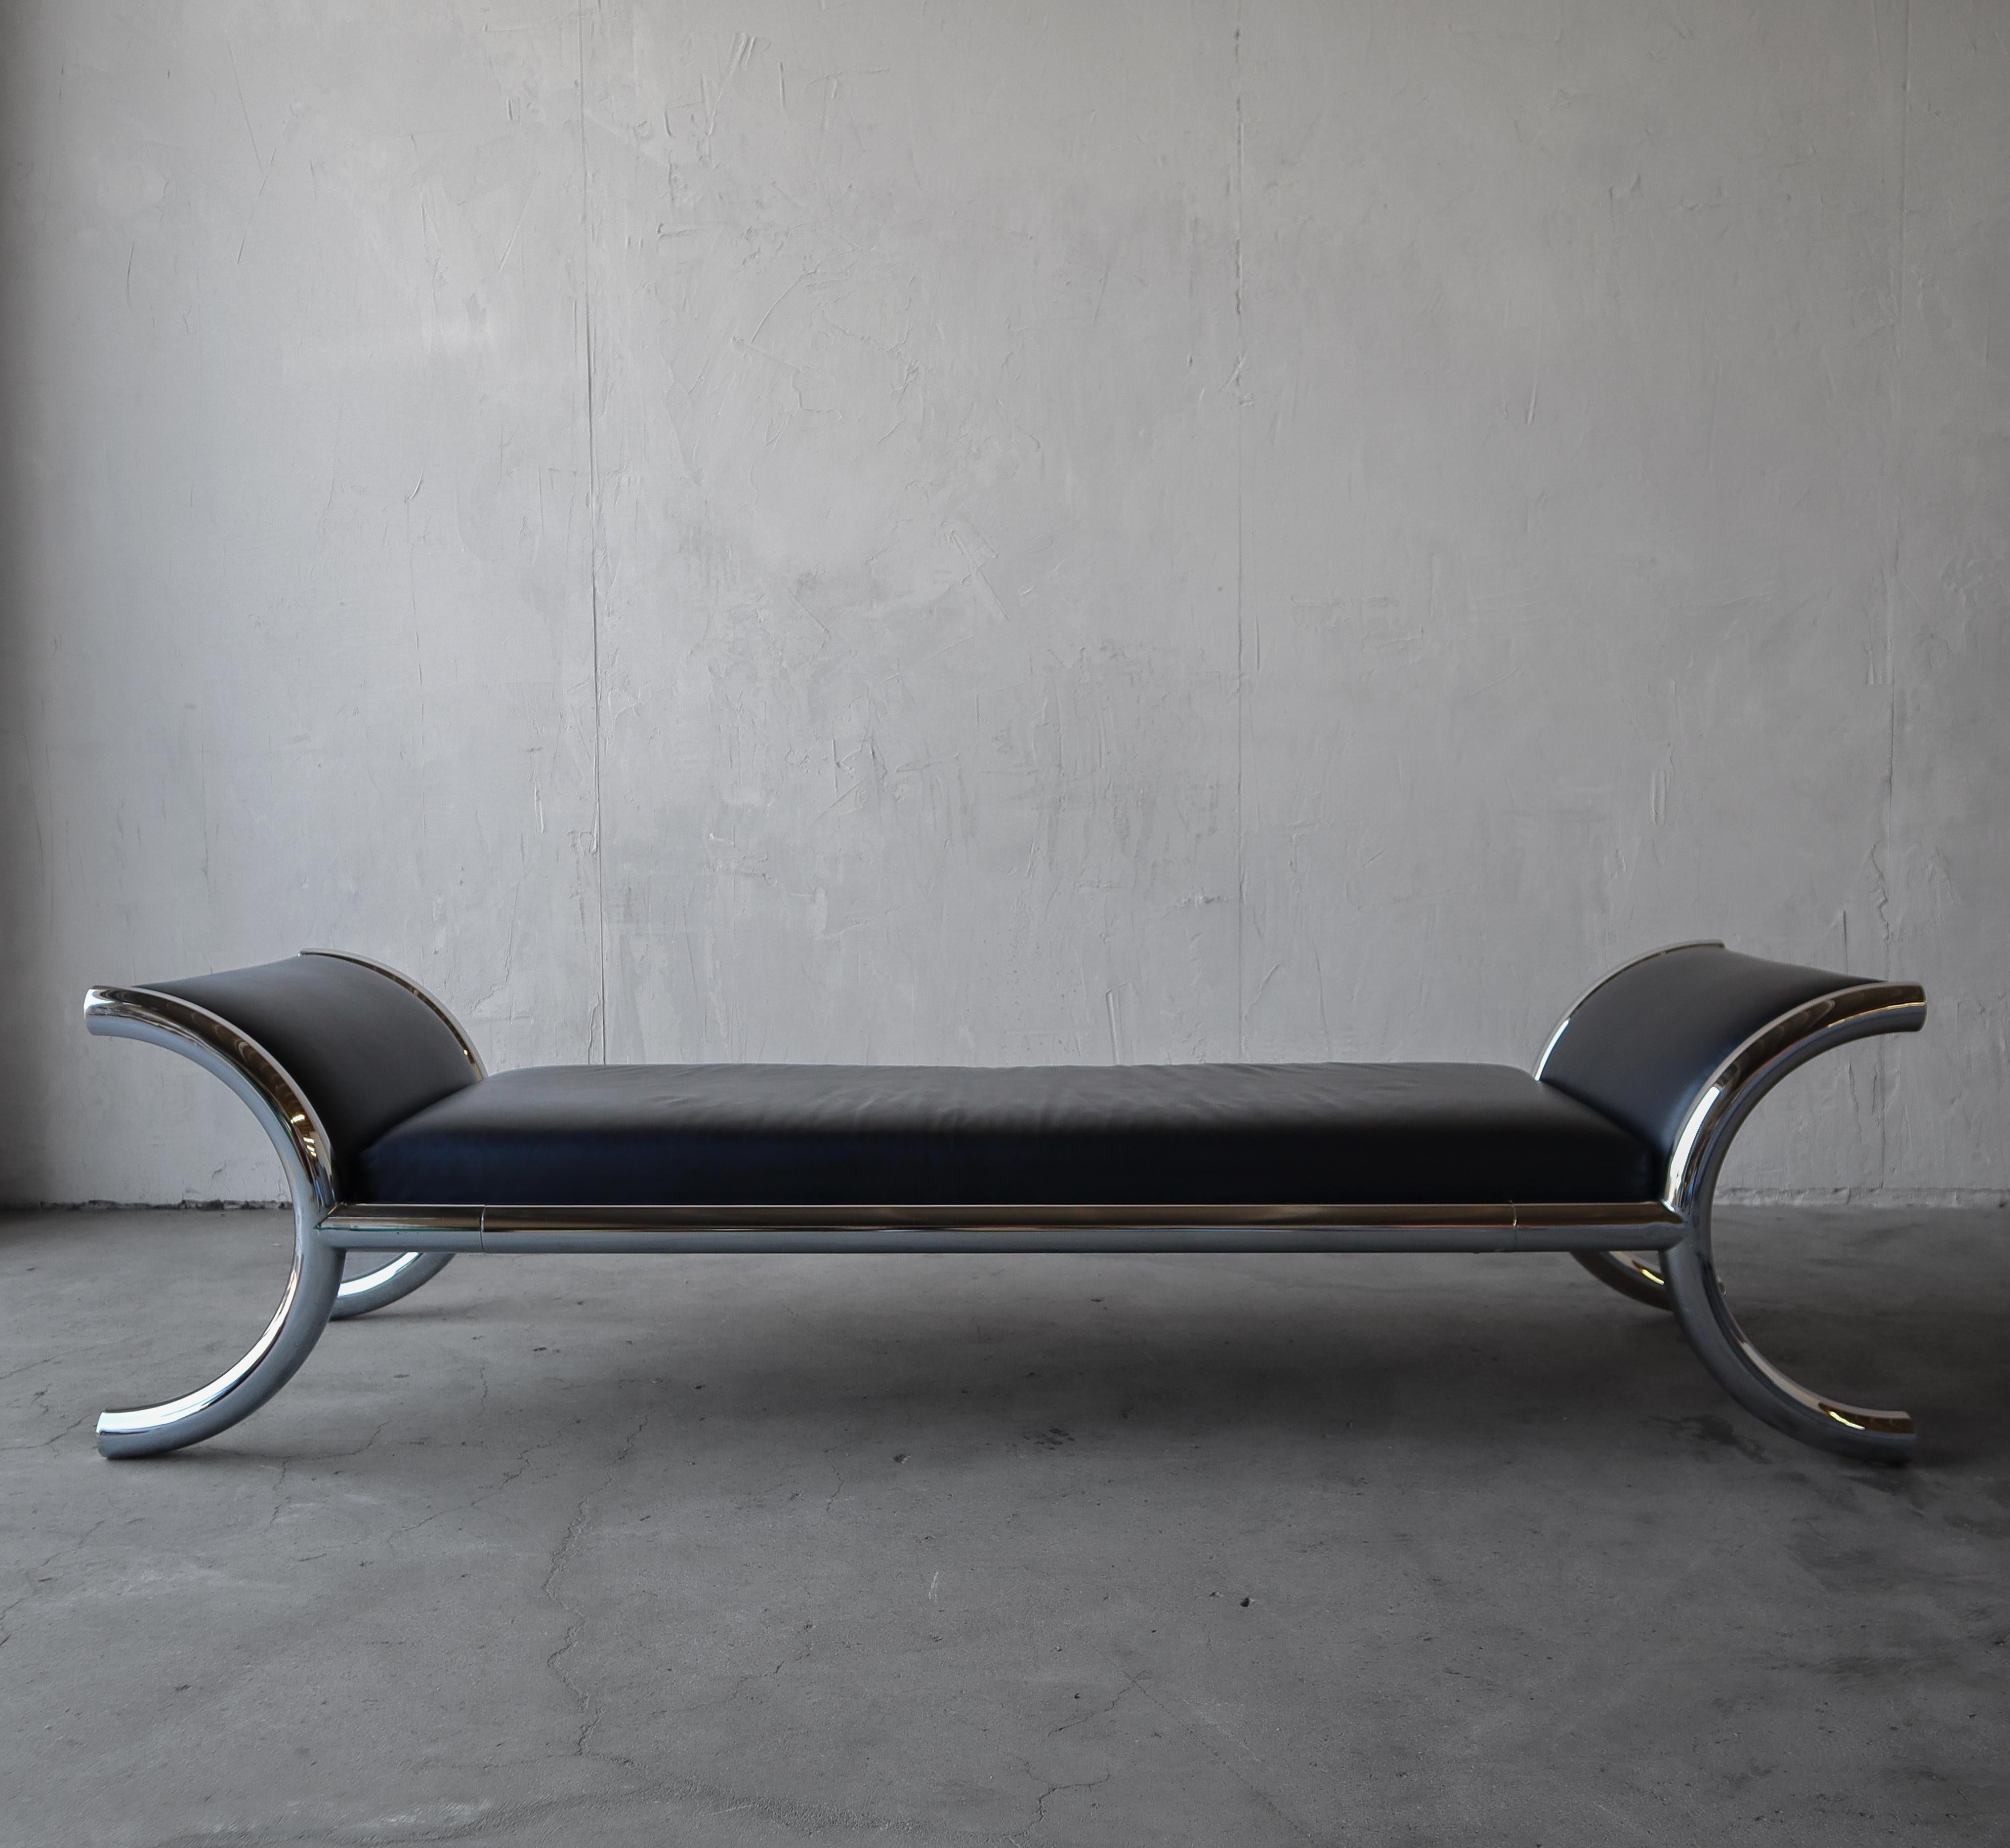 This oversized bench is more like a daybed, you can use it as either really. Would be beautiful on a focal wall with a massive piece of deserving art placed above. The seat is soft black leather and the frame is mirrored chrome, polished